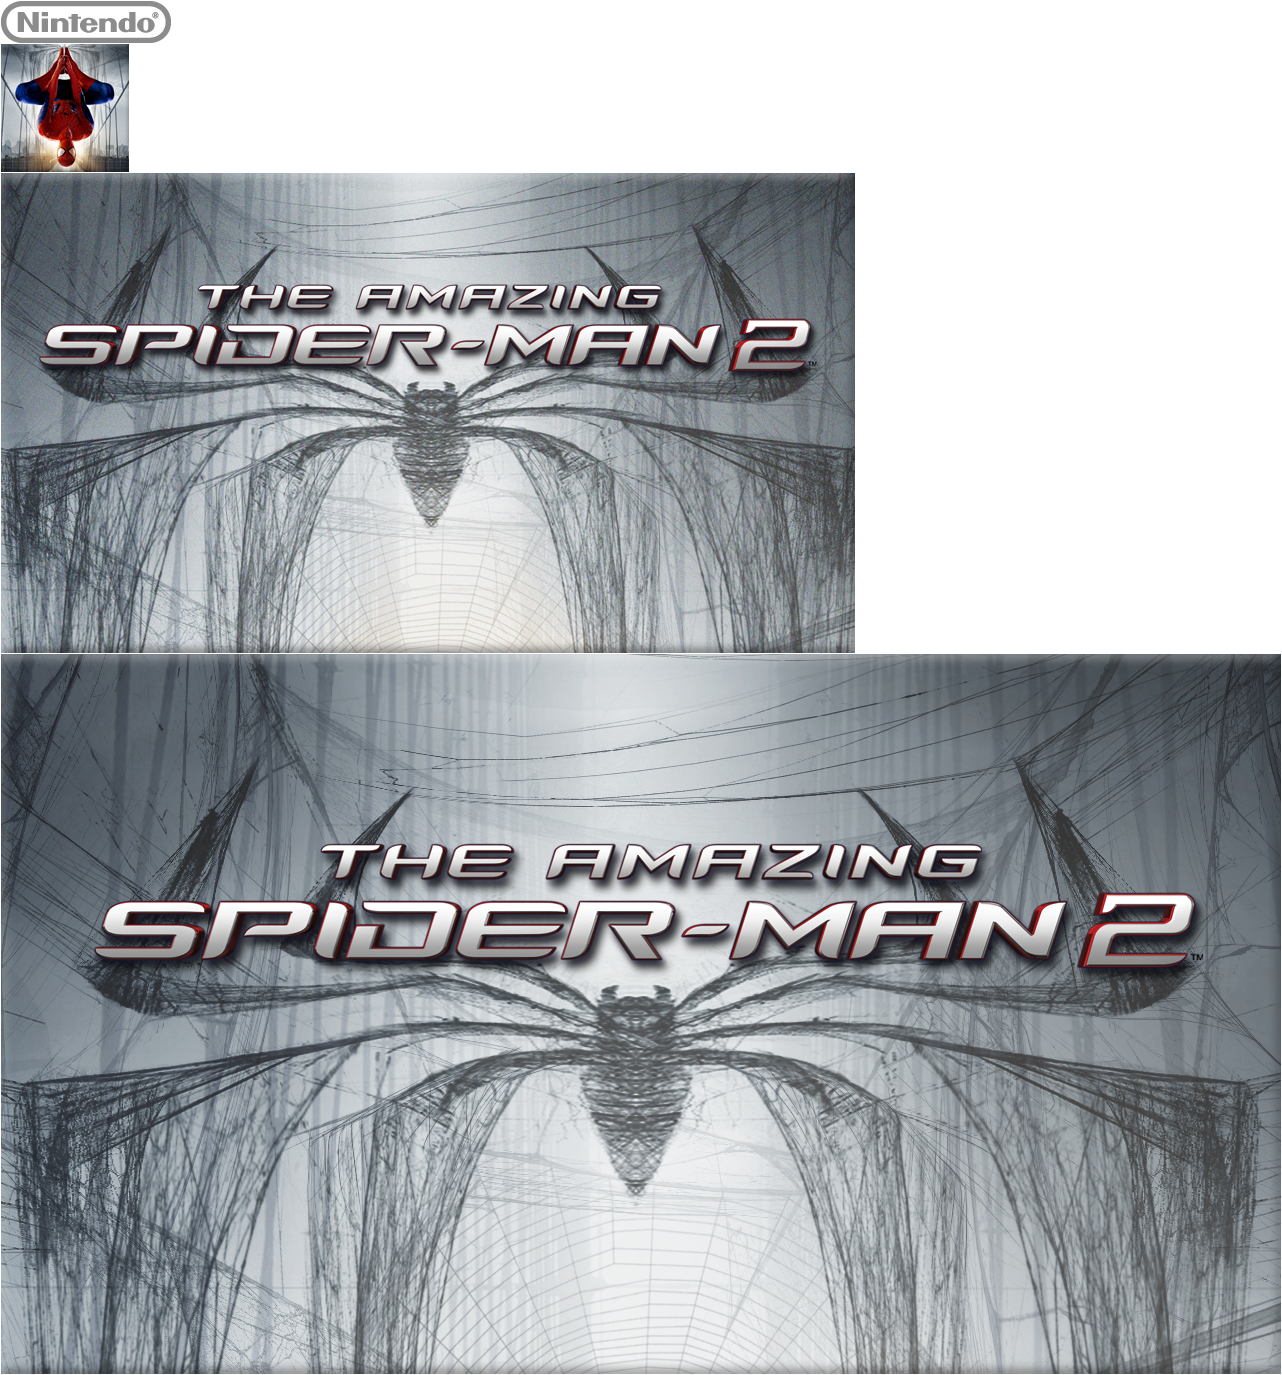 The Amazing Spider-Man 2 - HOME Menu Icon & Banners